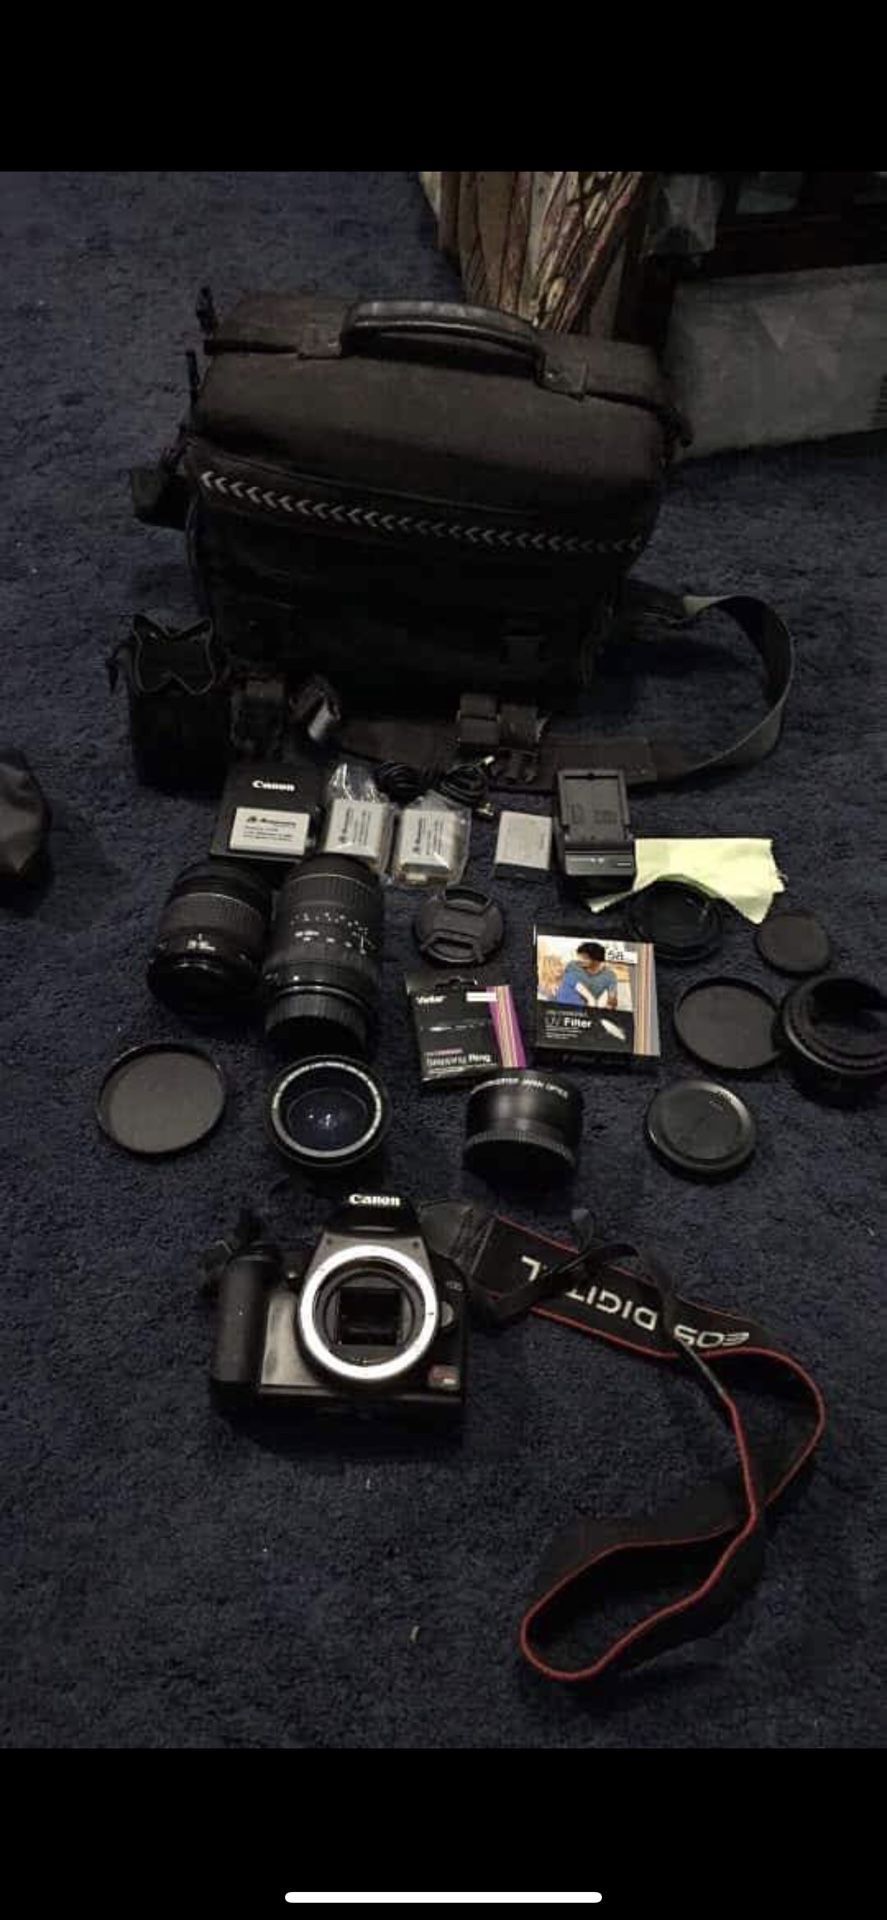 Canon dslr rebel xs DS 126191 with lot of accessories 2 lens 100-300 & 28- 80.1 fisheye 1 hd telephoto